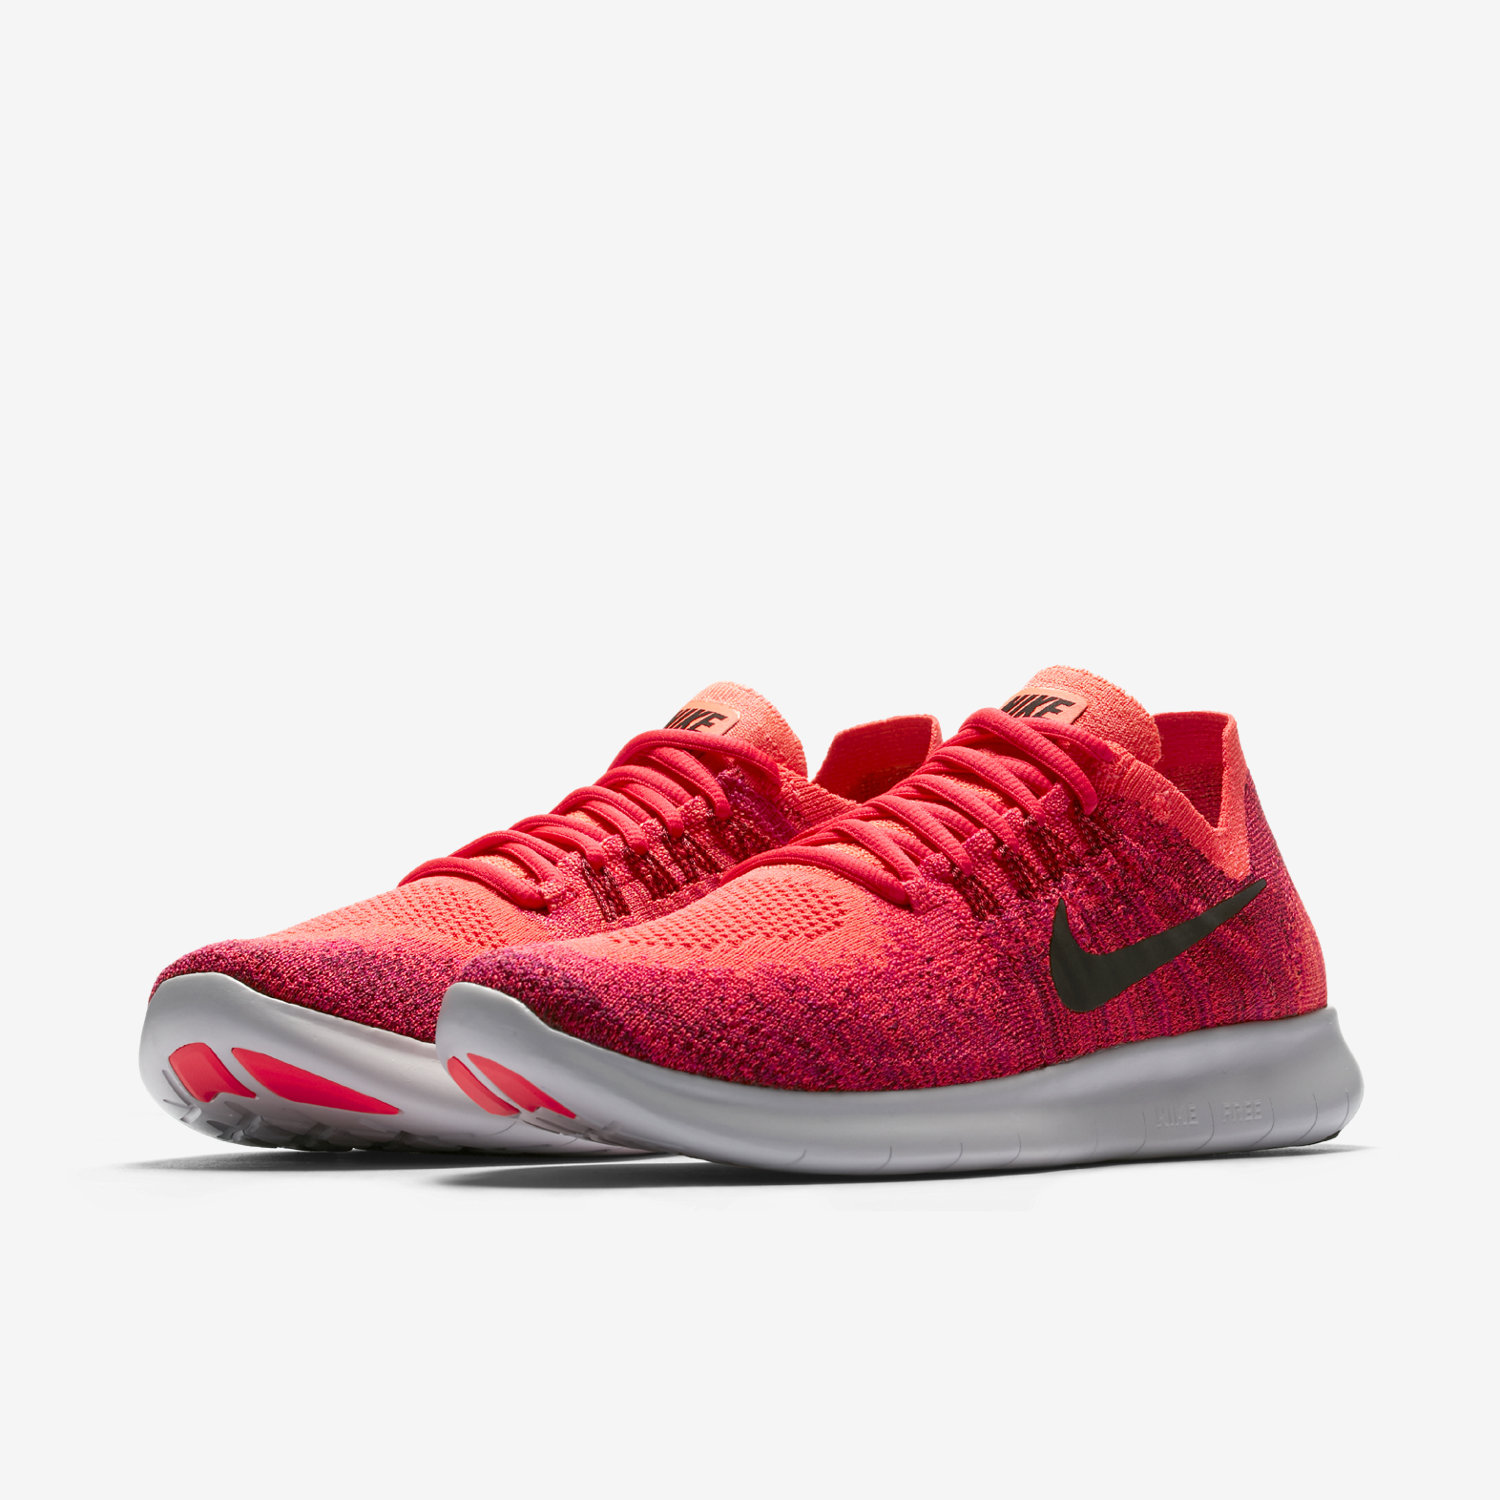 Nike free run womens – come in all size and shape